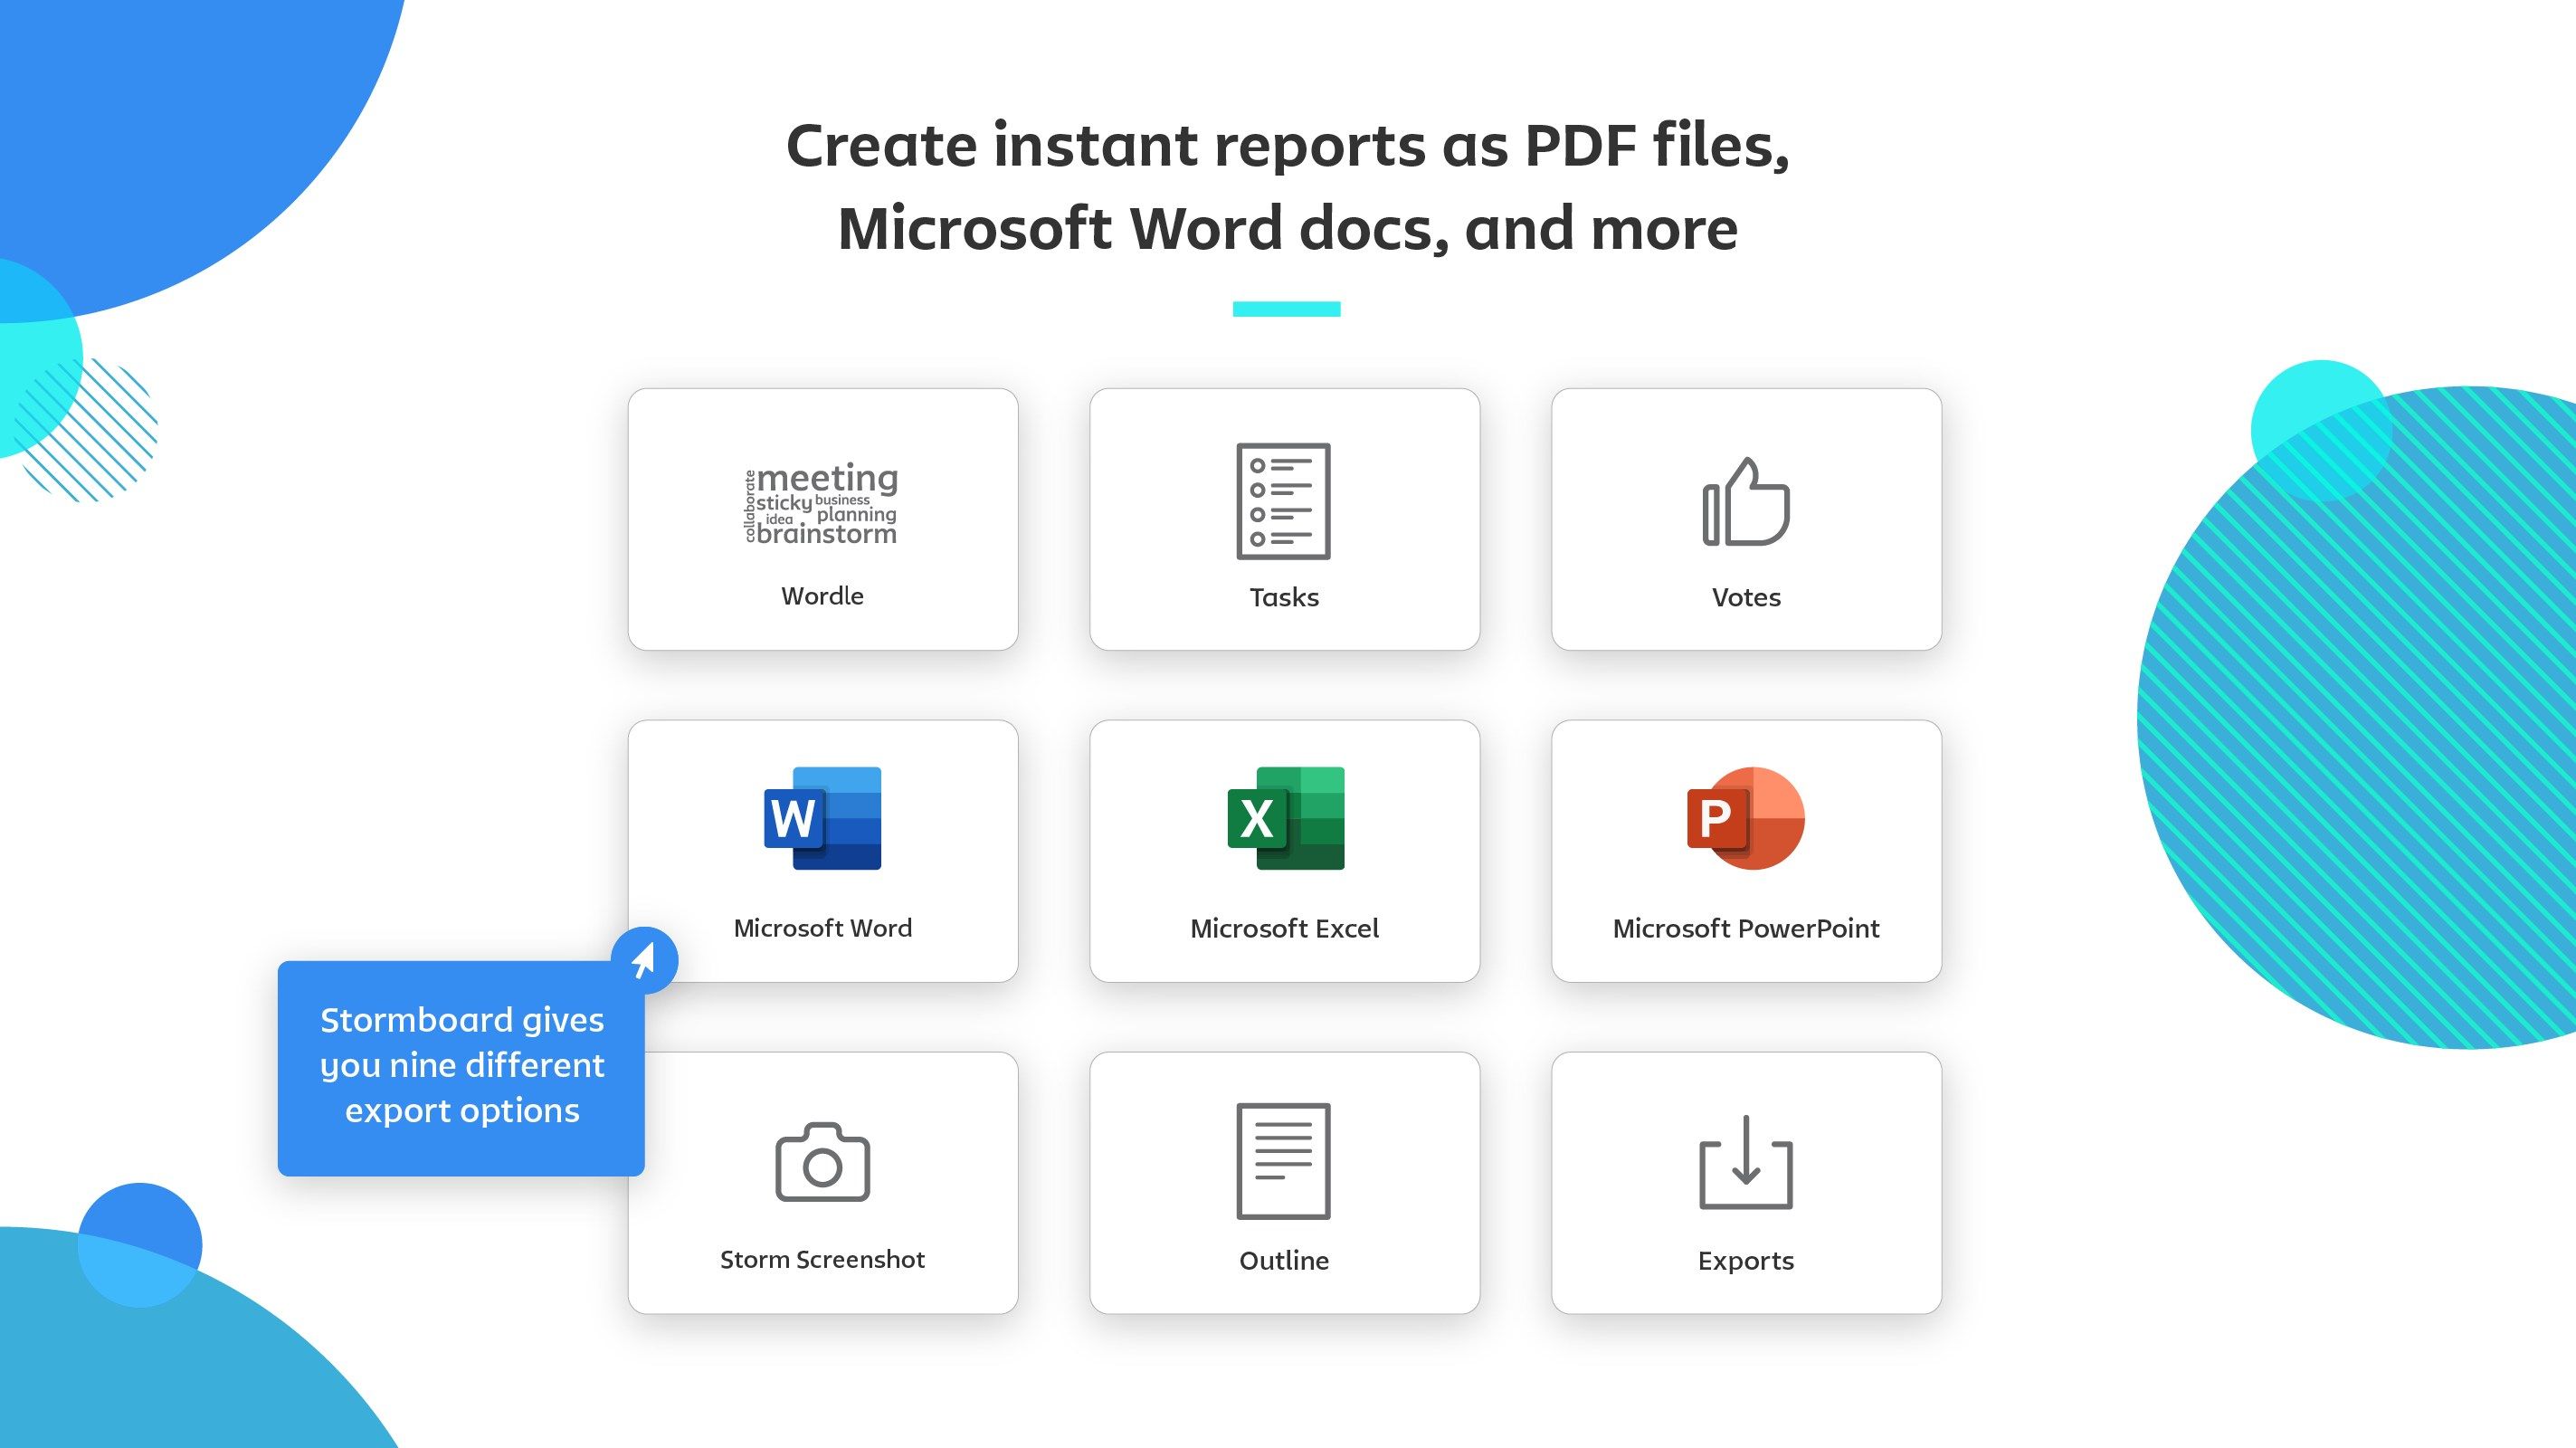 Create instant reports as PDF files, Microsoft Word docx, and more